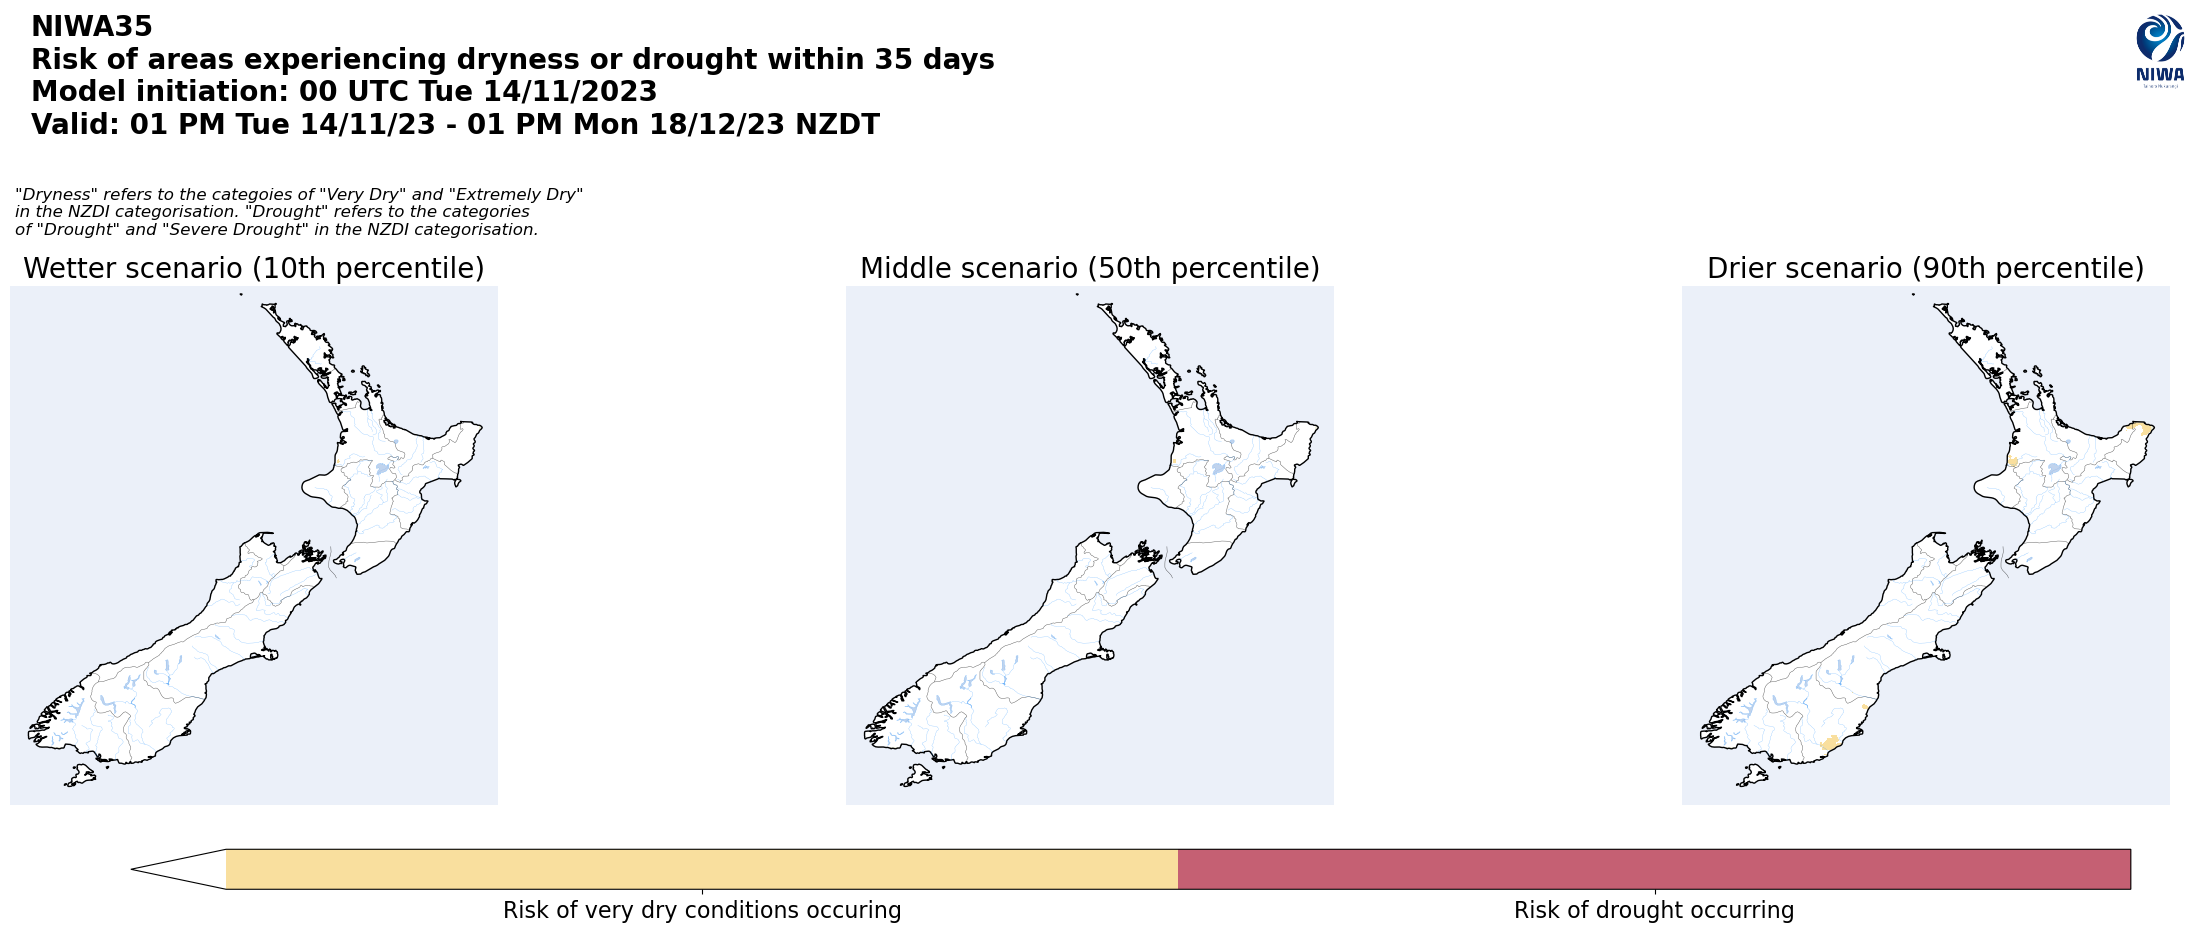 Risk of areas experiencing dryness for 35 days from 14 November 2023